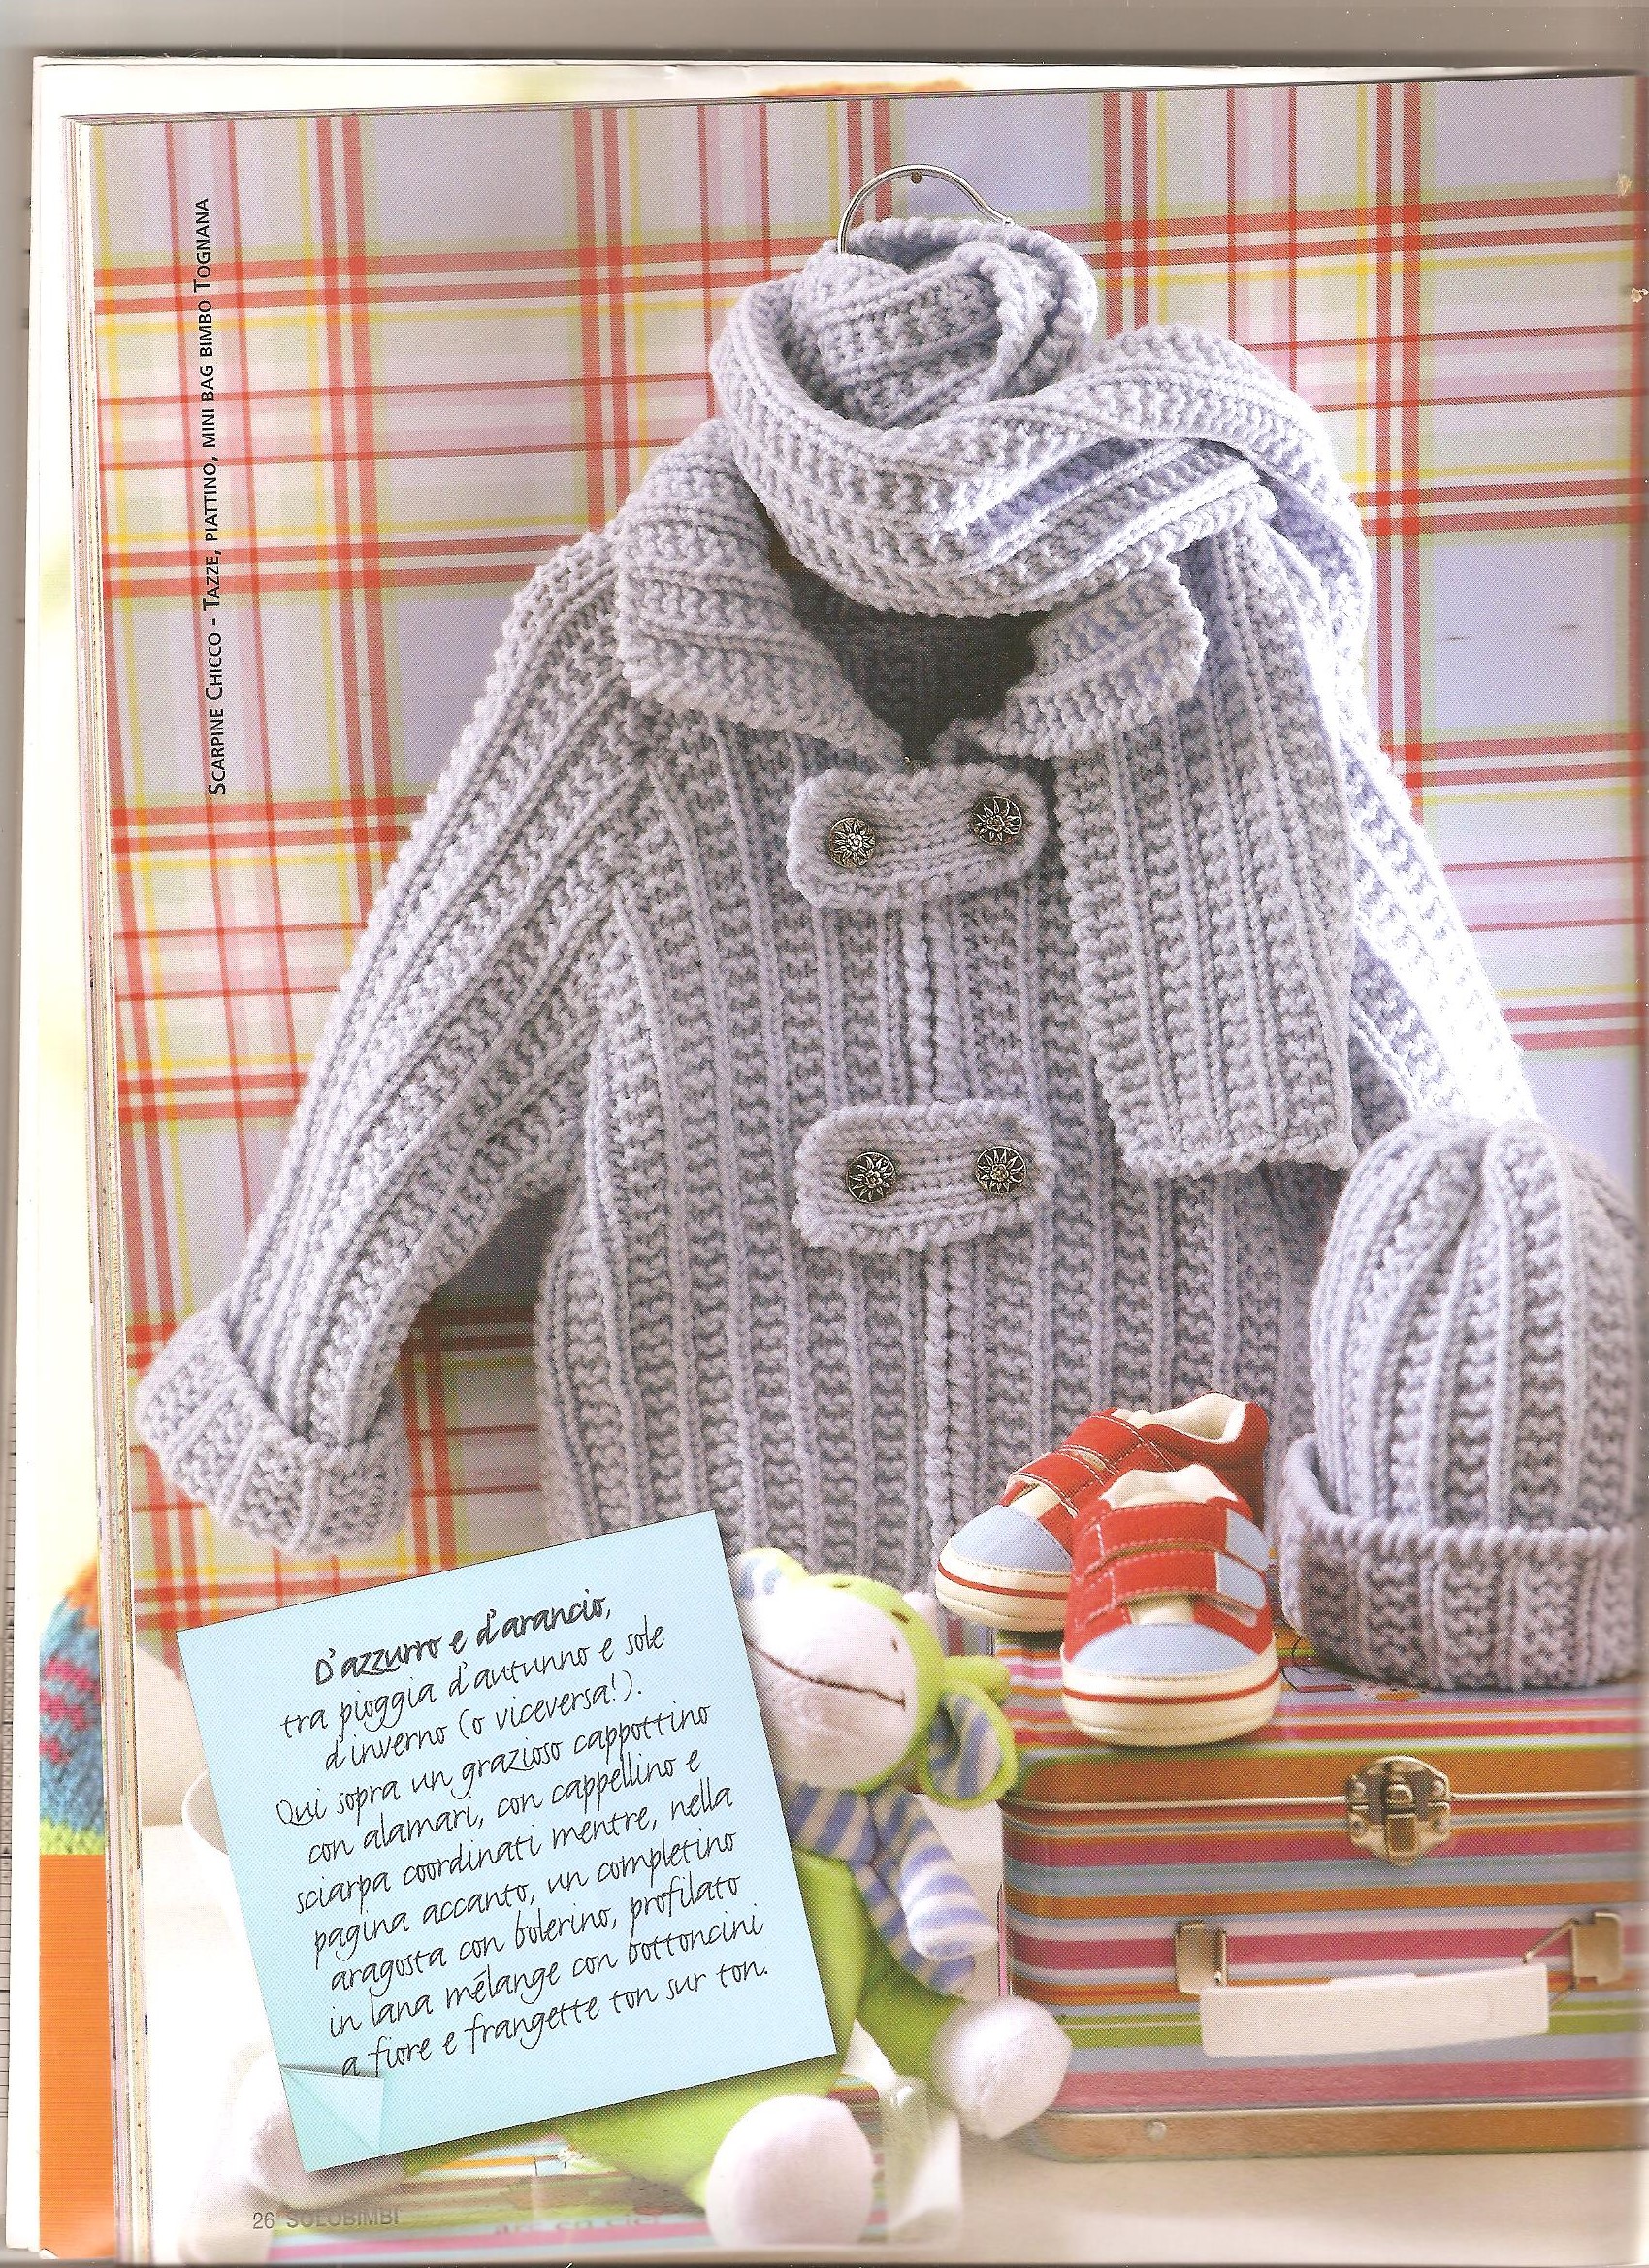 Jacket knitted for babies knitting pattern (1)